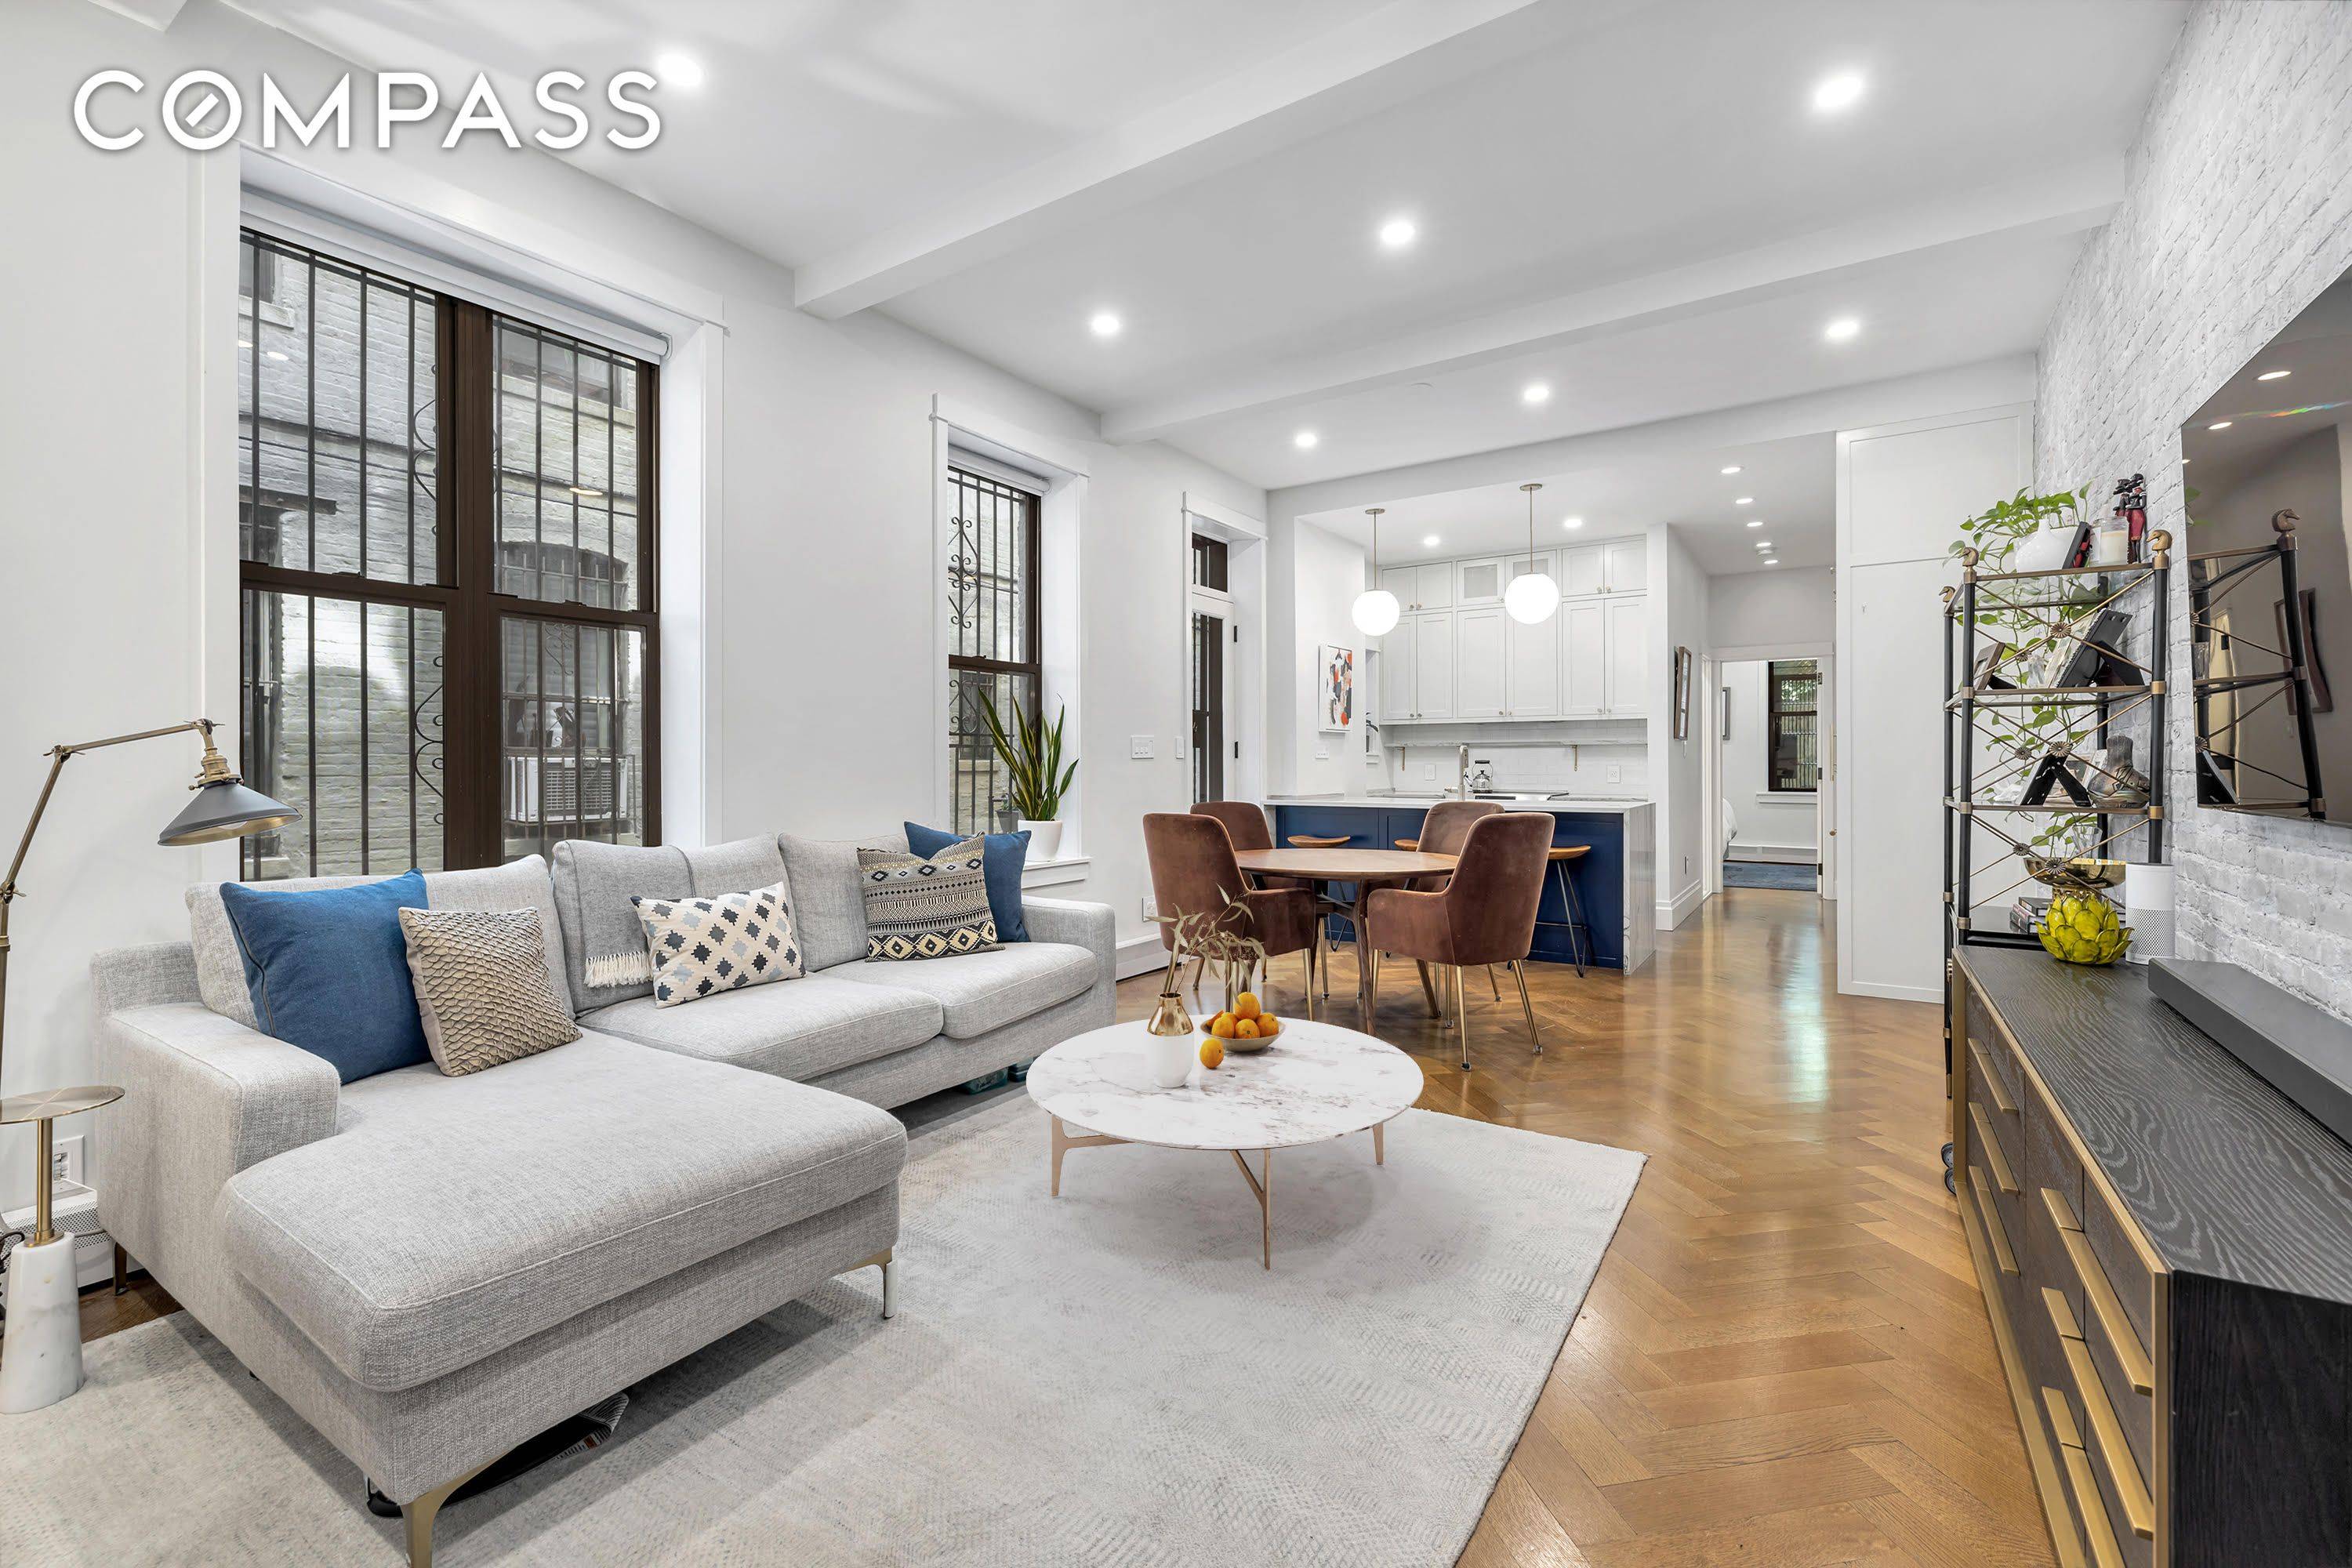 Come home to this beautifully designed, large 2 bedroom, 2 full bath duplex in prime Prospect Heights, complete with your own large private outdoor patio.